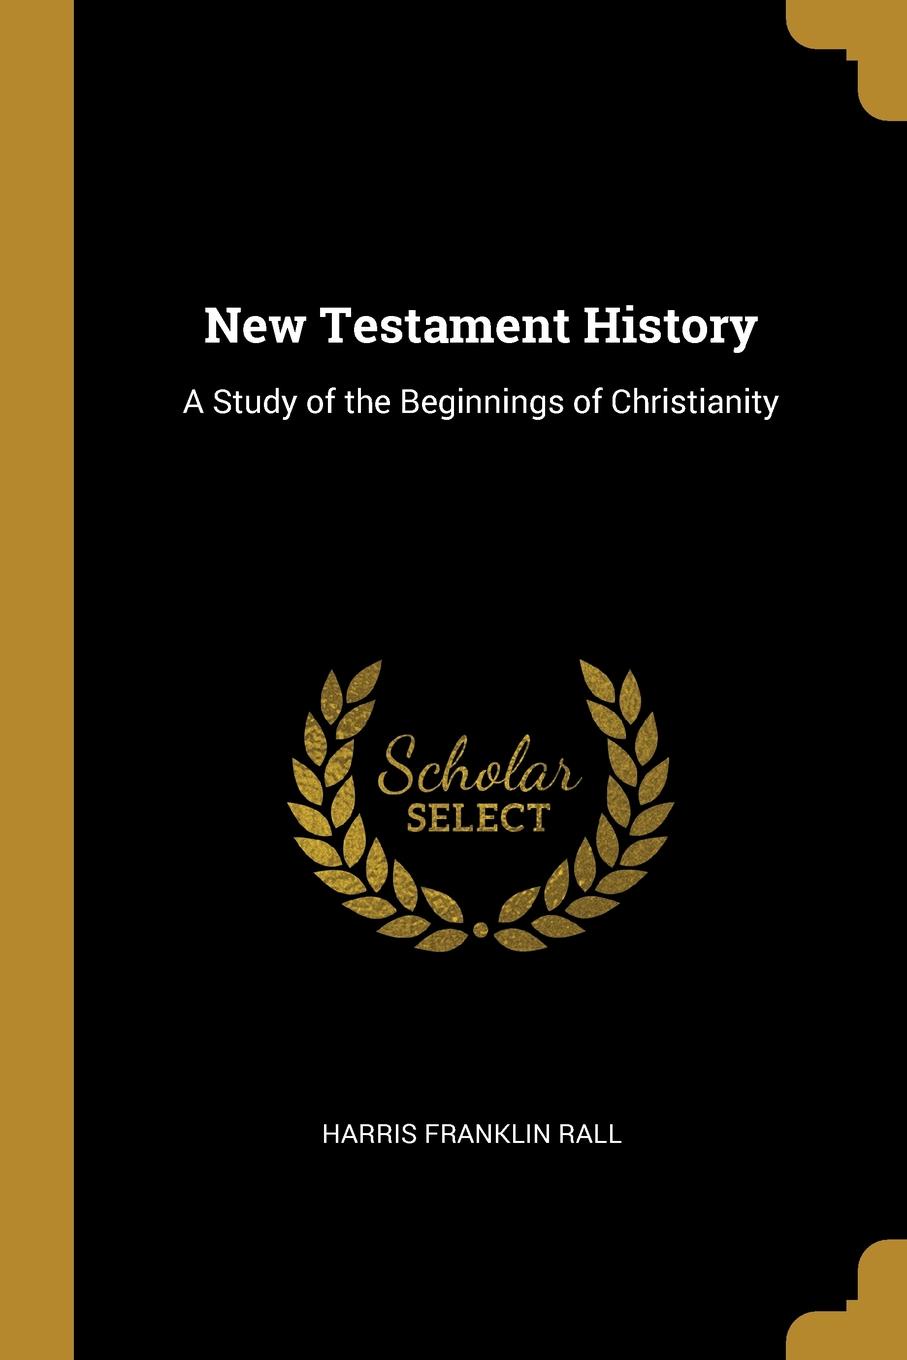 New Testament History. A Study of the Beginnings of Christianity